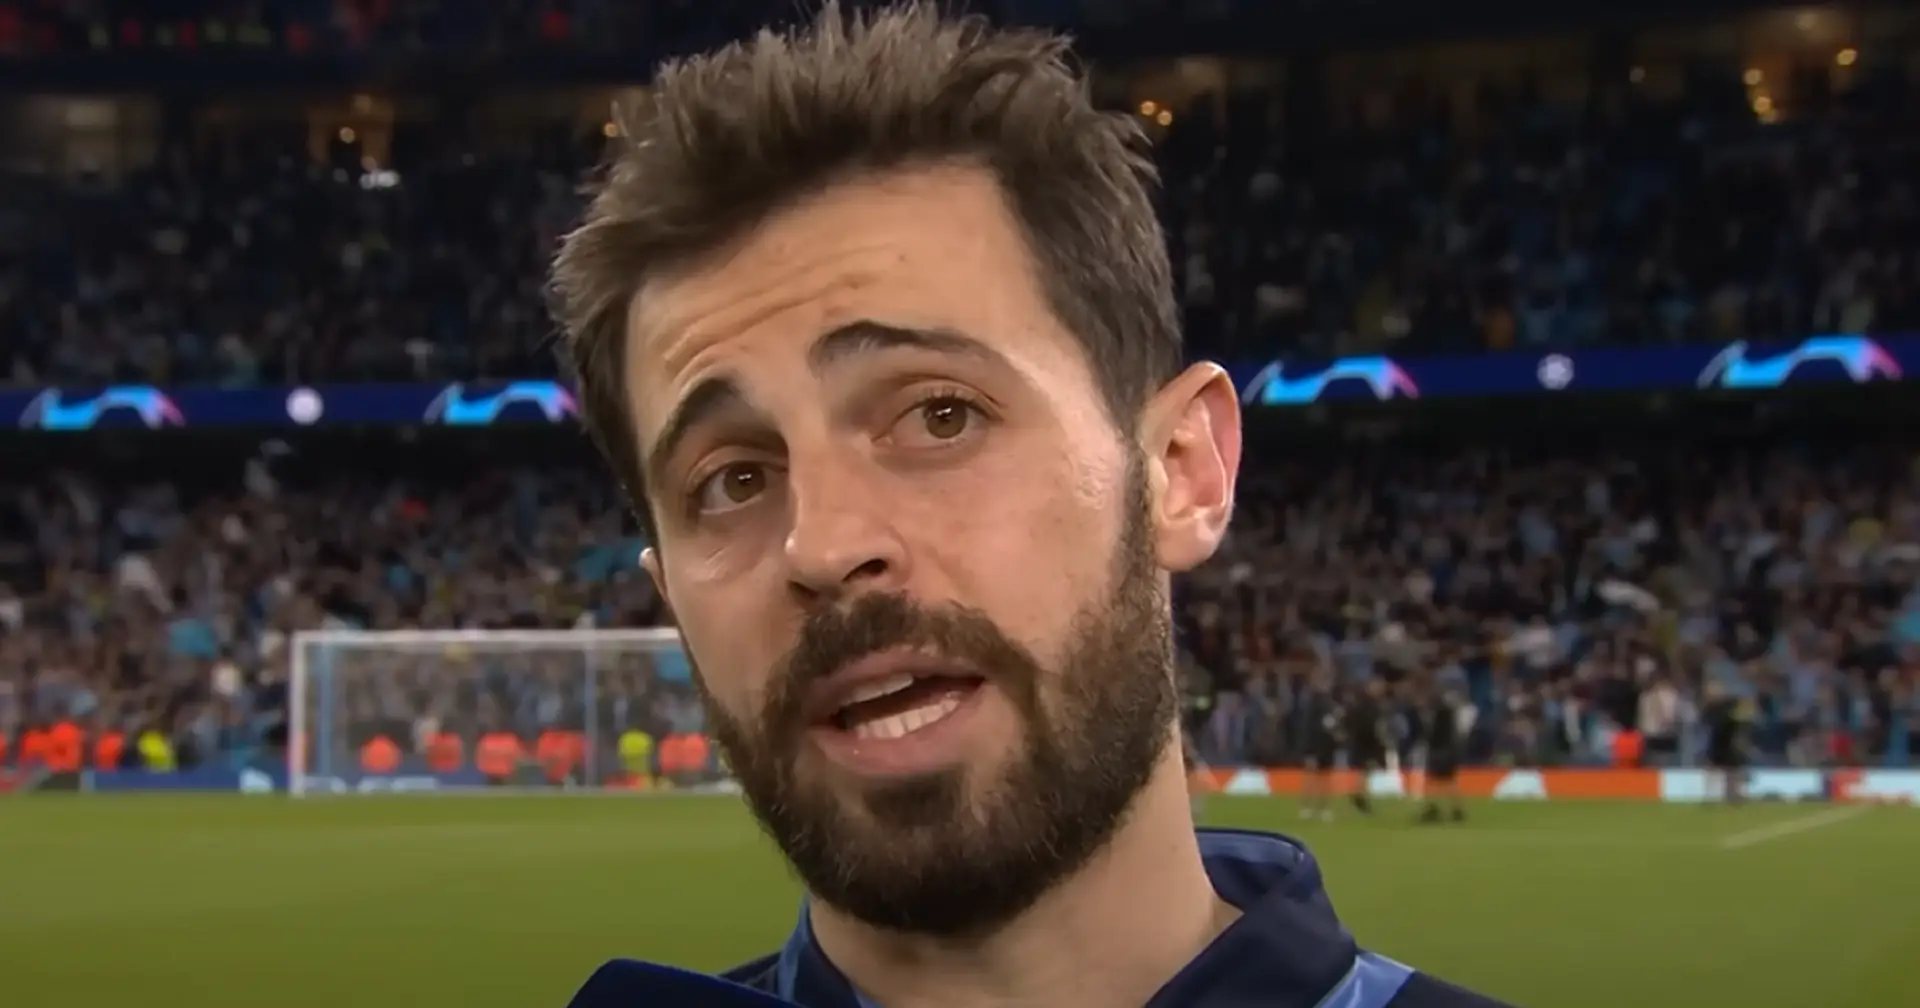 Bernardo Silva says Liverpool are 'back' & 2 other big stories you could've missed